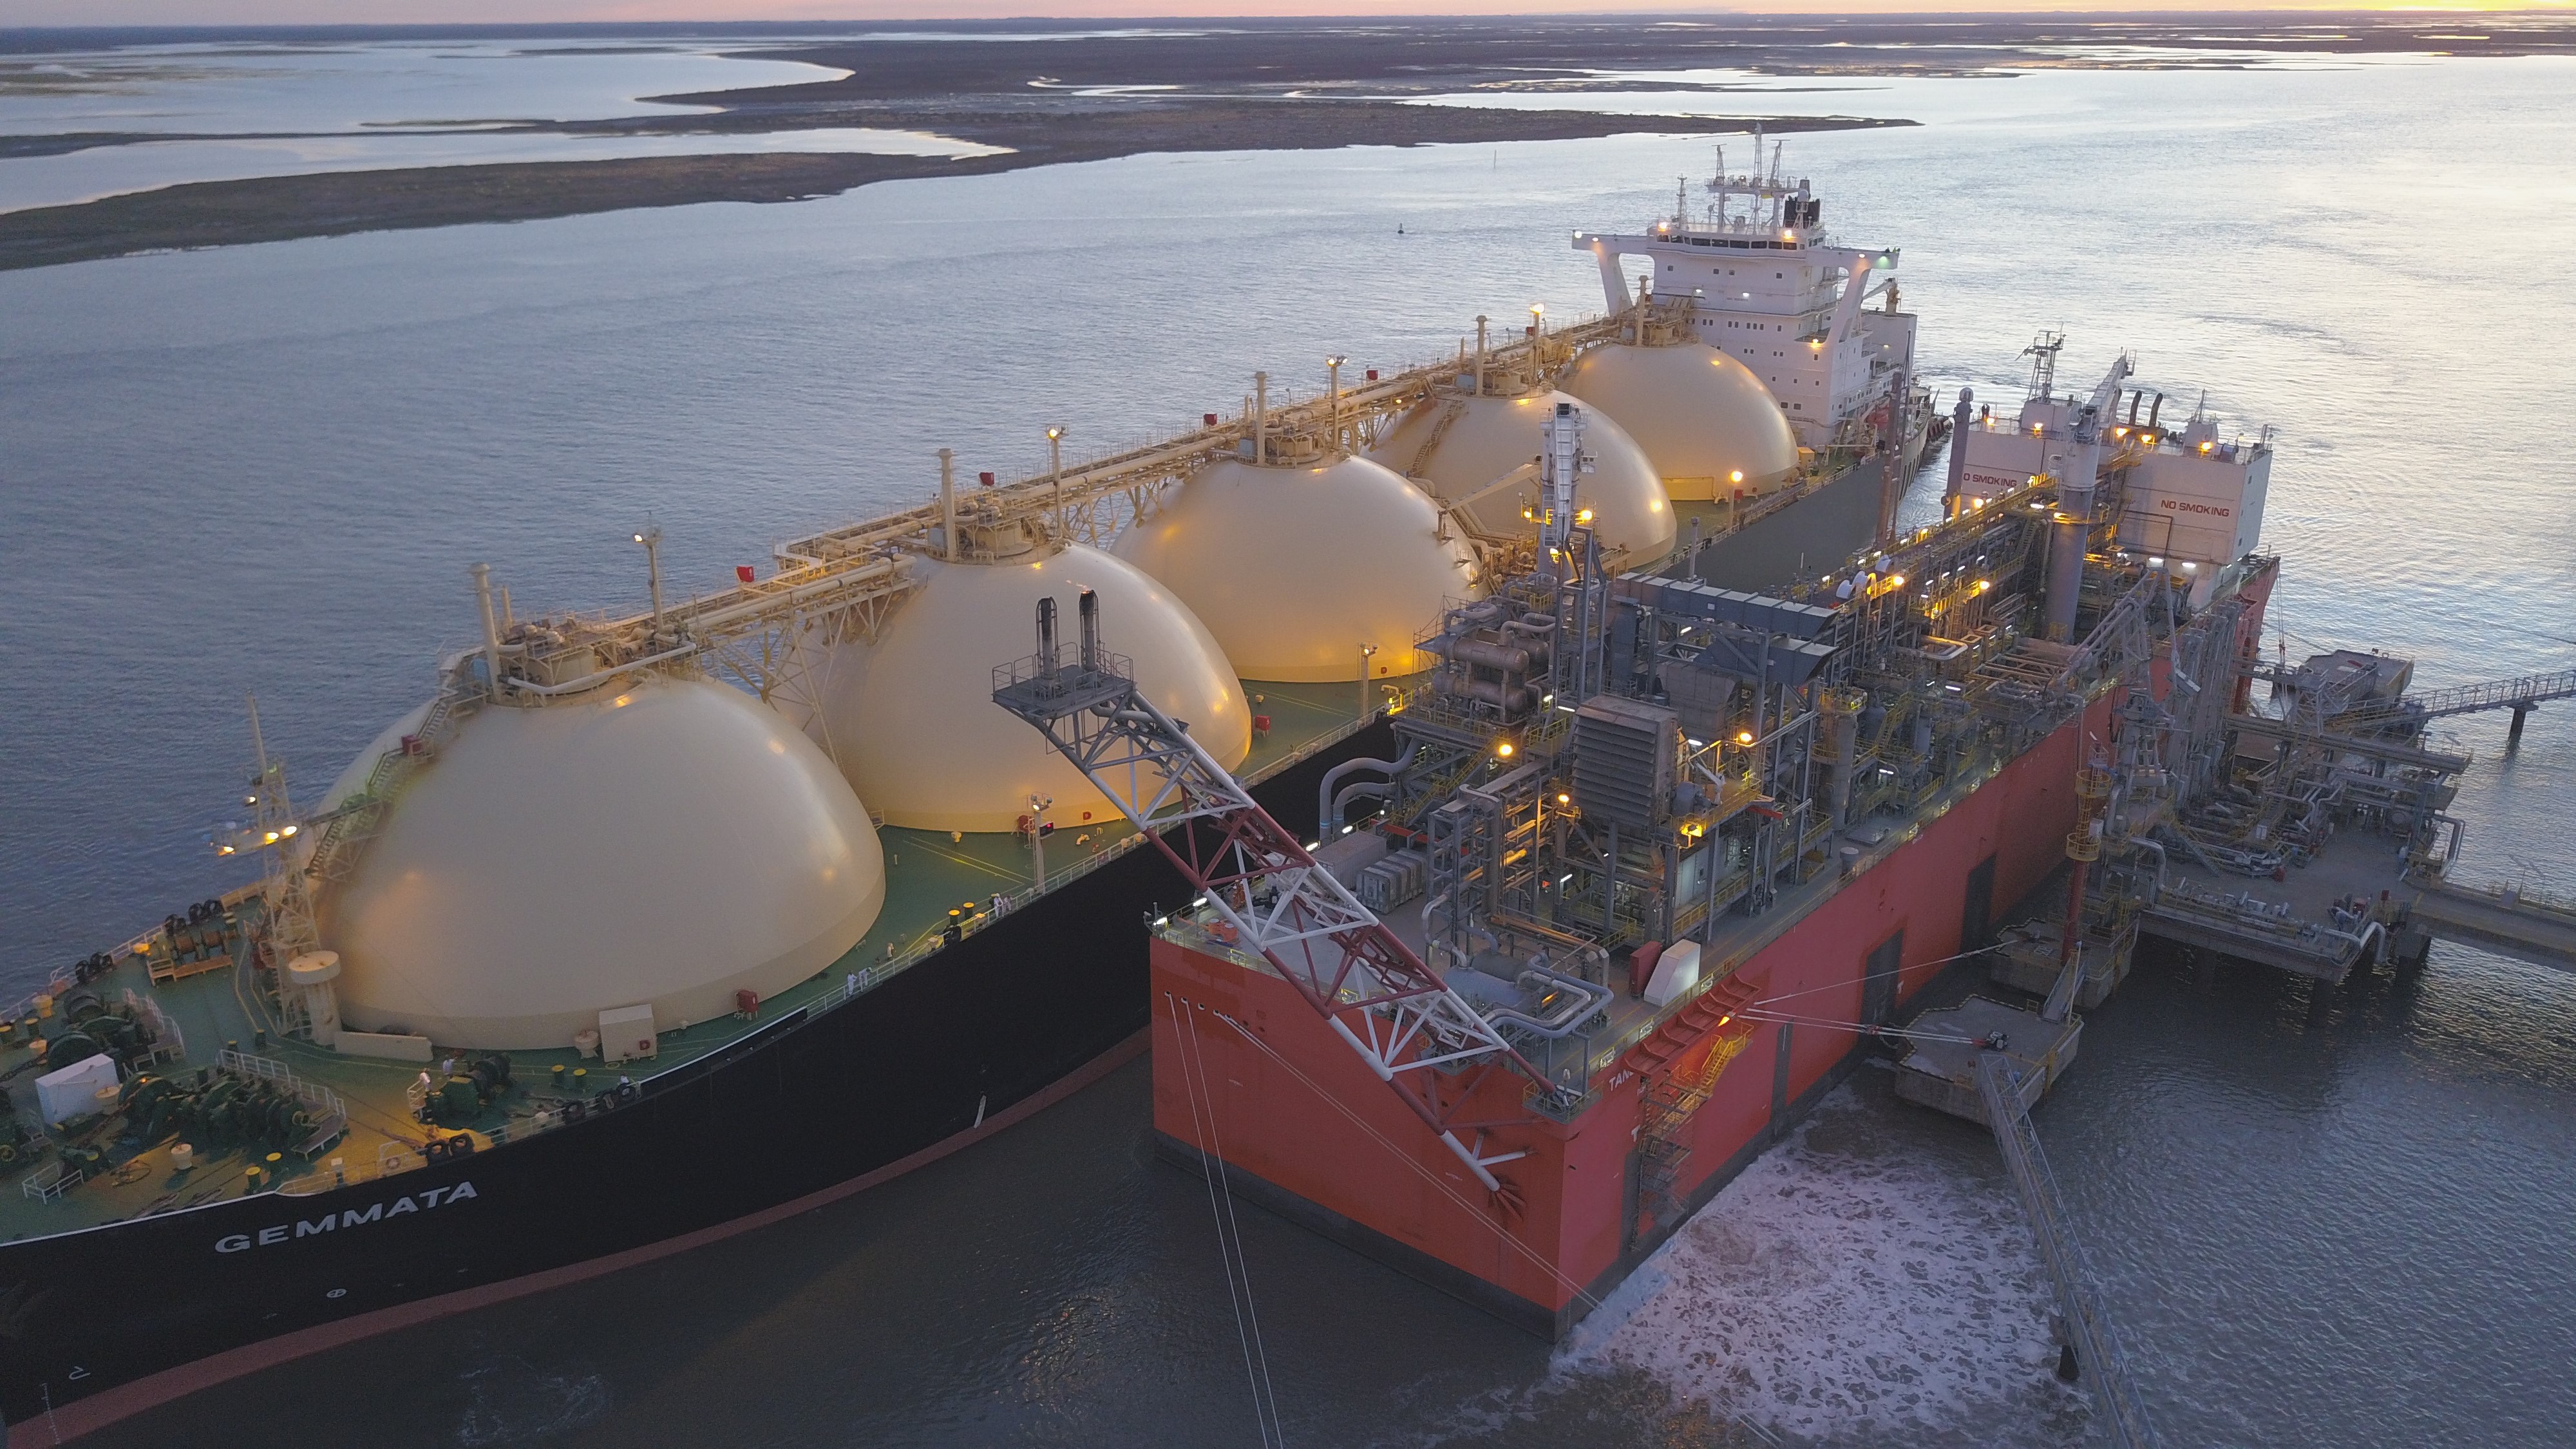 Sycar granted the approval for LNG trade in Ecuador